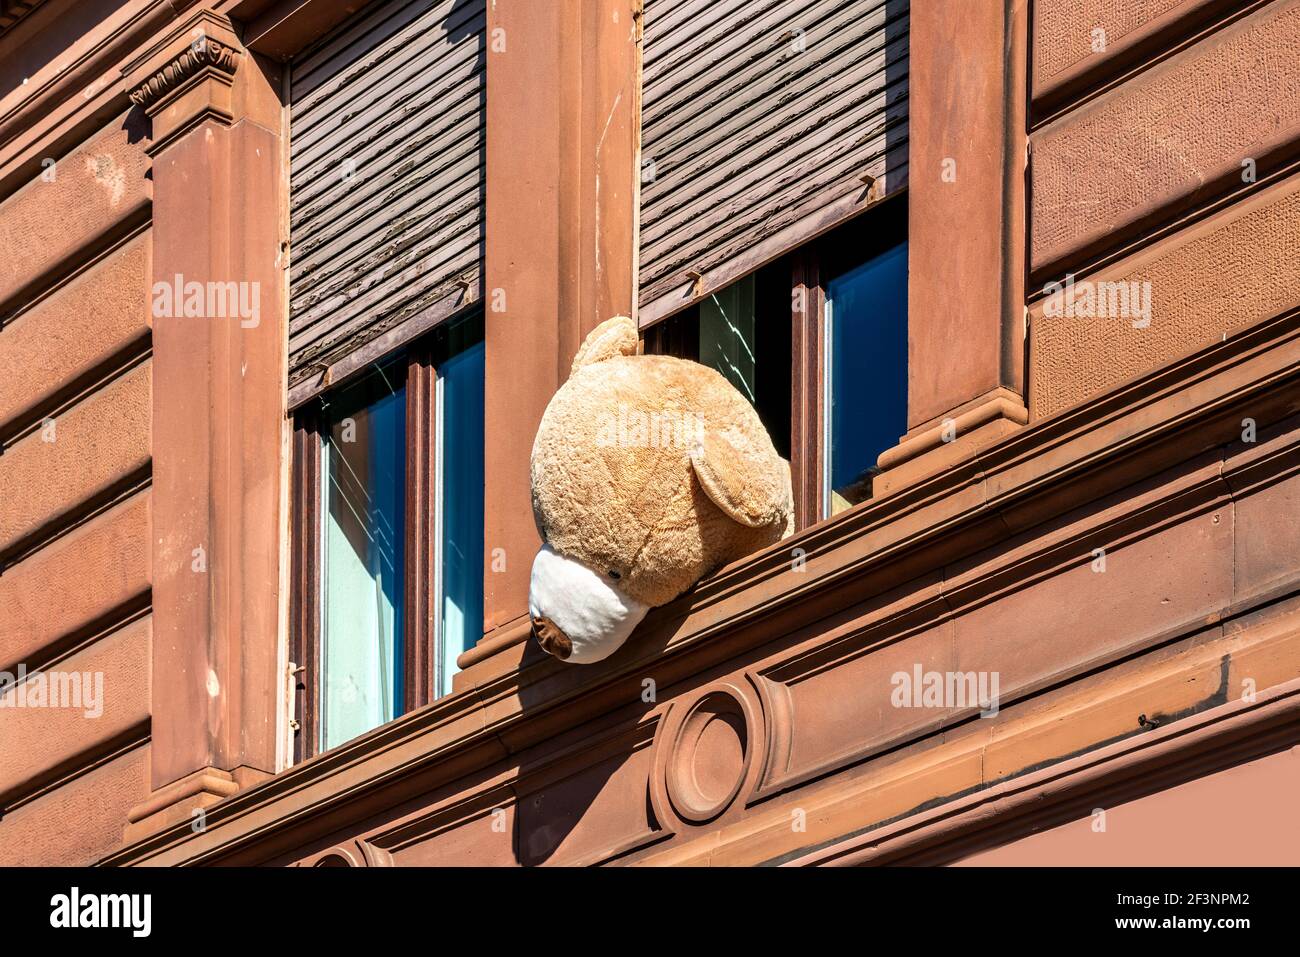 Big lonely teddy bear looking out the window Stock Photo